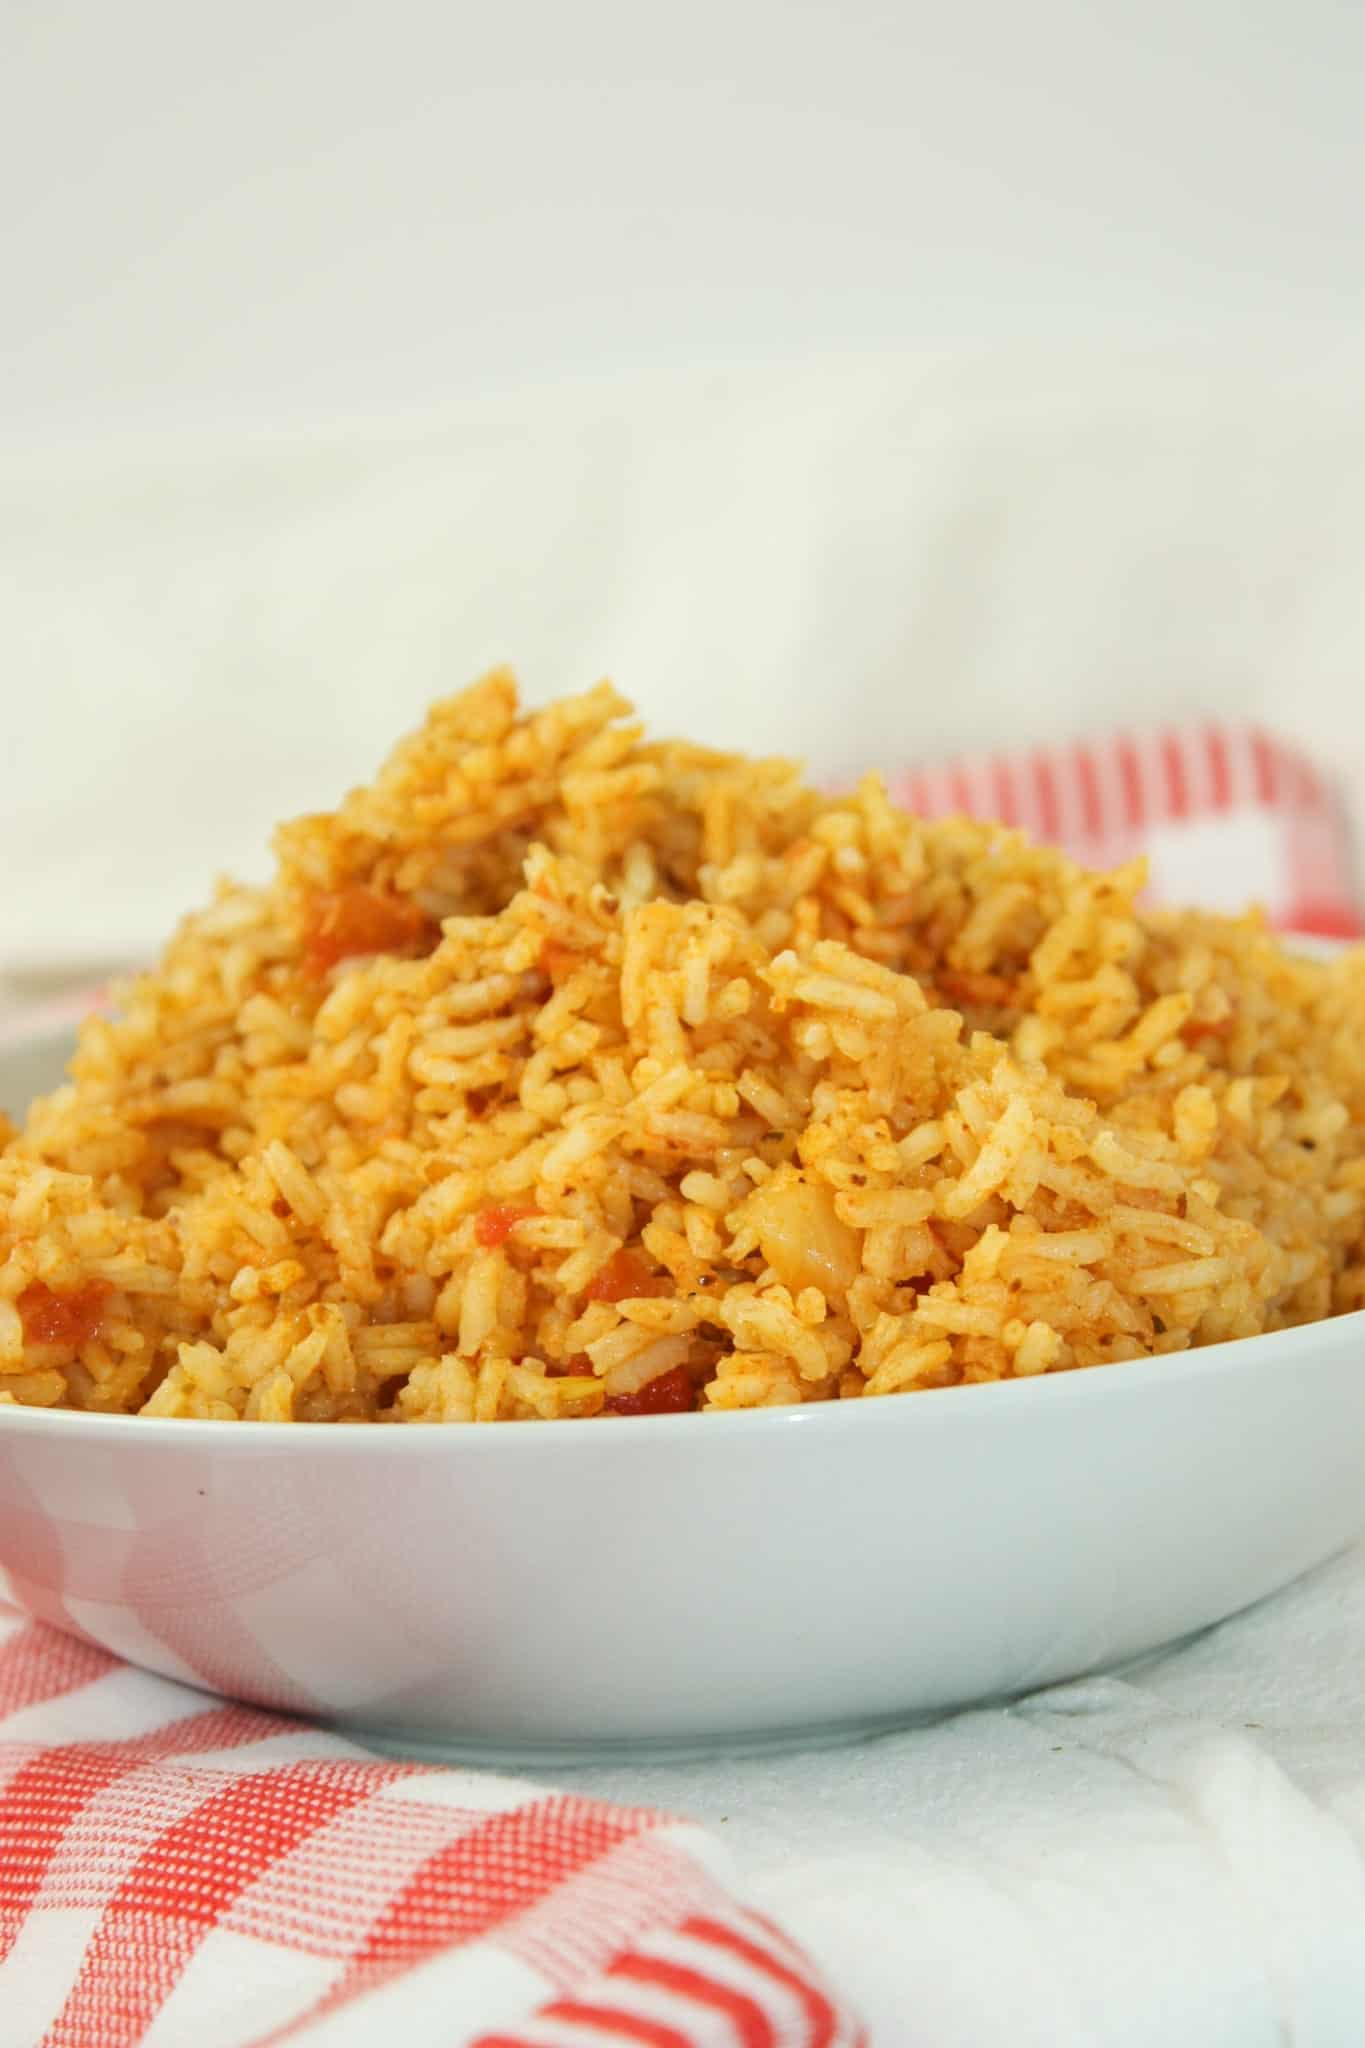 Gluten Free Spanish Rice is a flavourful side dish.  This fluffy rice dish is the perfect complement to a variety of meals.